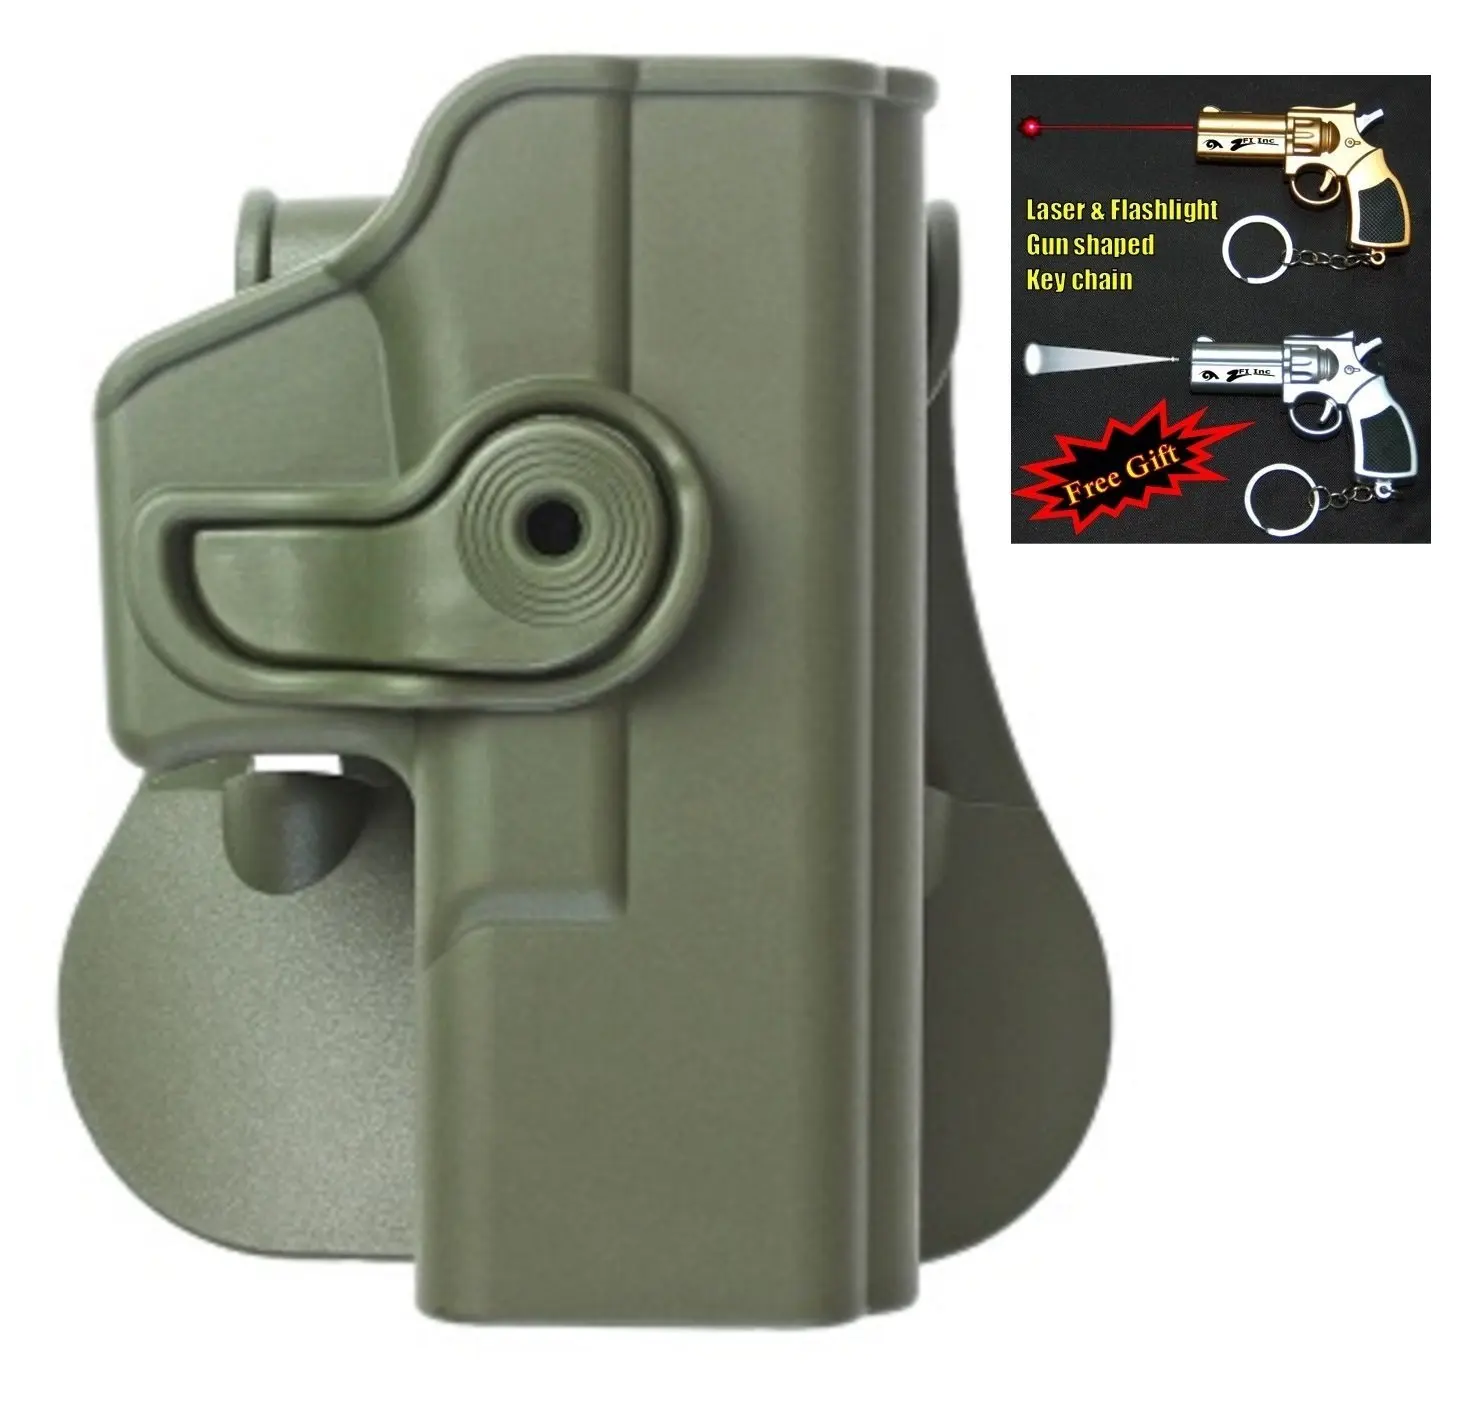 IMI Defense Conceal Carry Tactical Roto Polymer Holster For Glock 19/23/25/28/32 Pistol Gen 4 Compatible 